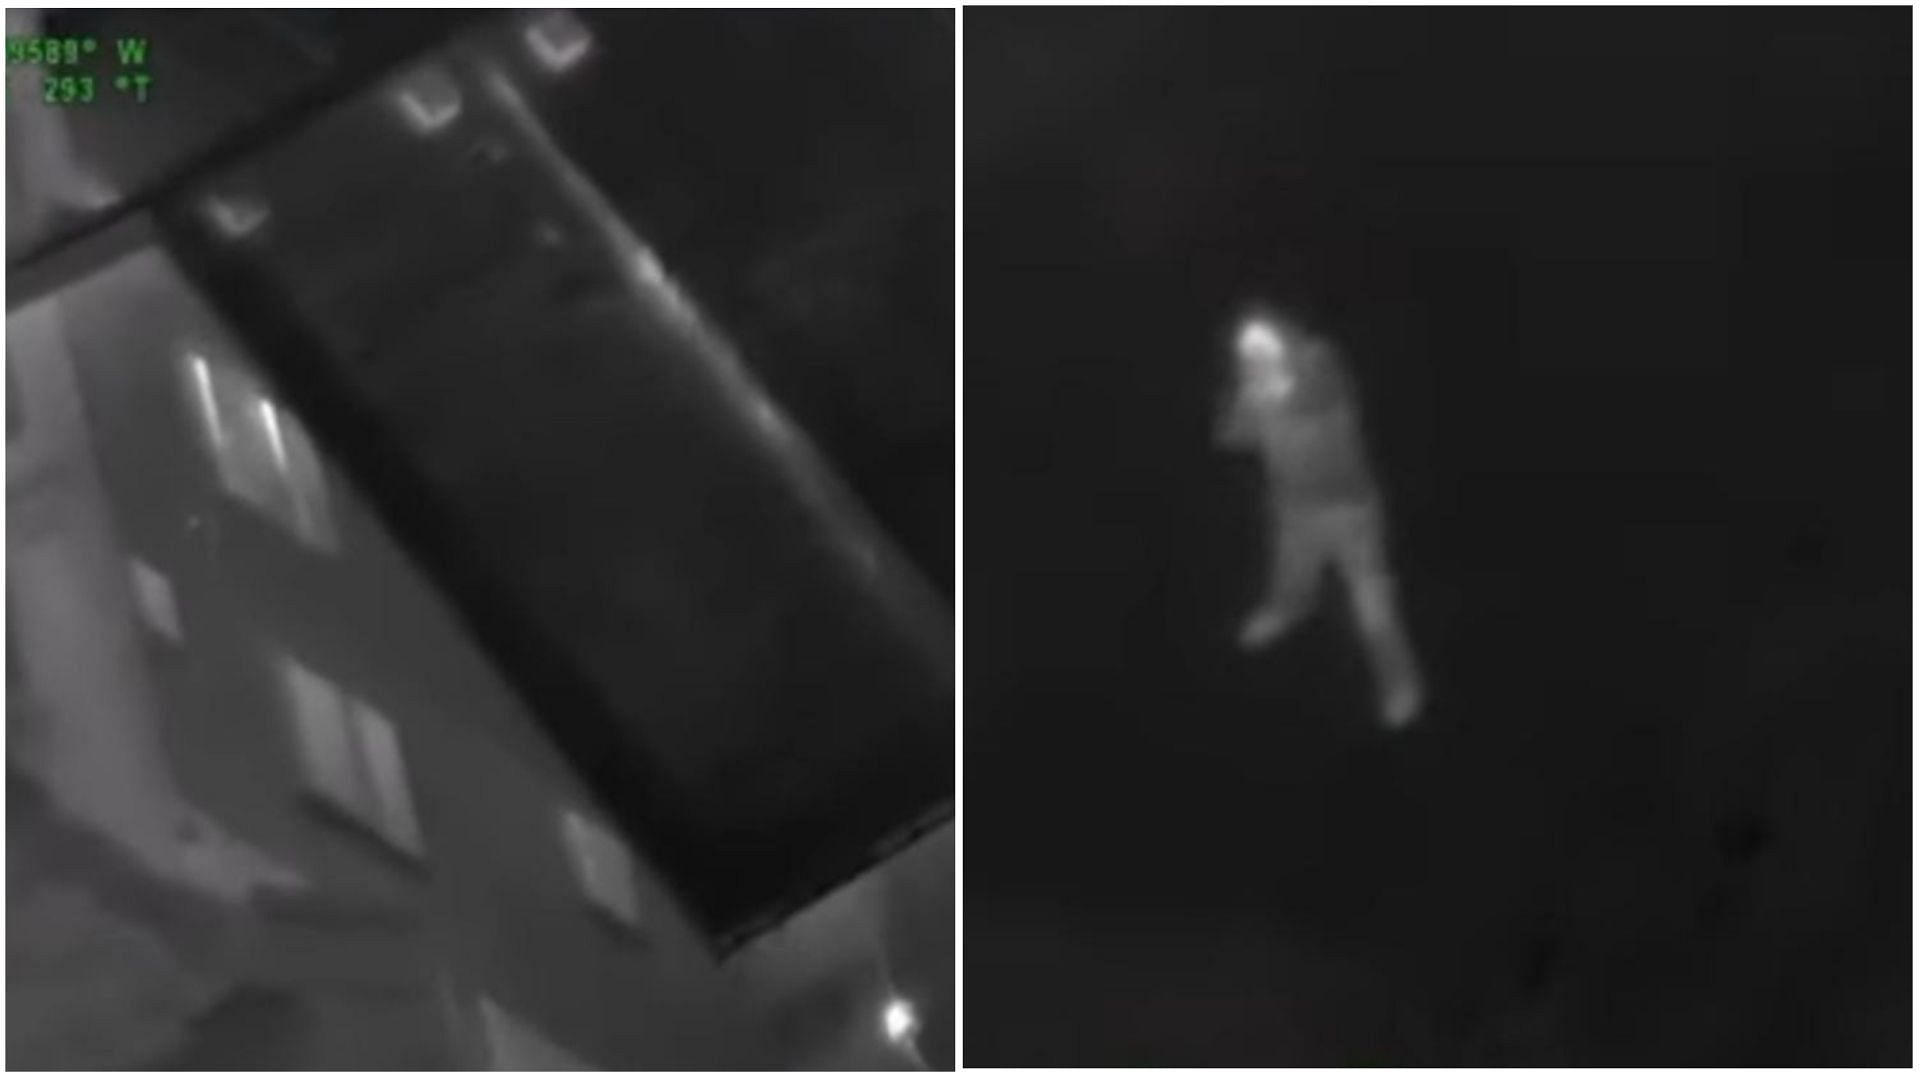 Footage released by Michigan police shows a man shooting at a police helicopter from the backyard of an abandoned house (Screen shots taken from footage provided by the Michigan State Police)